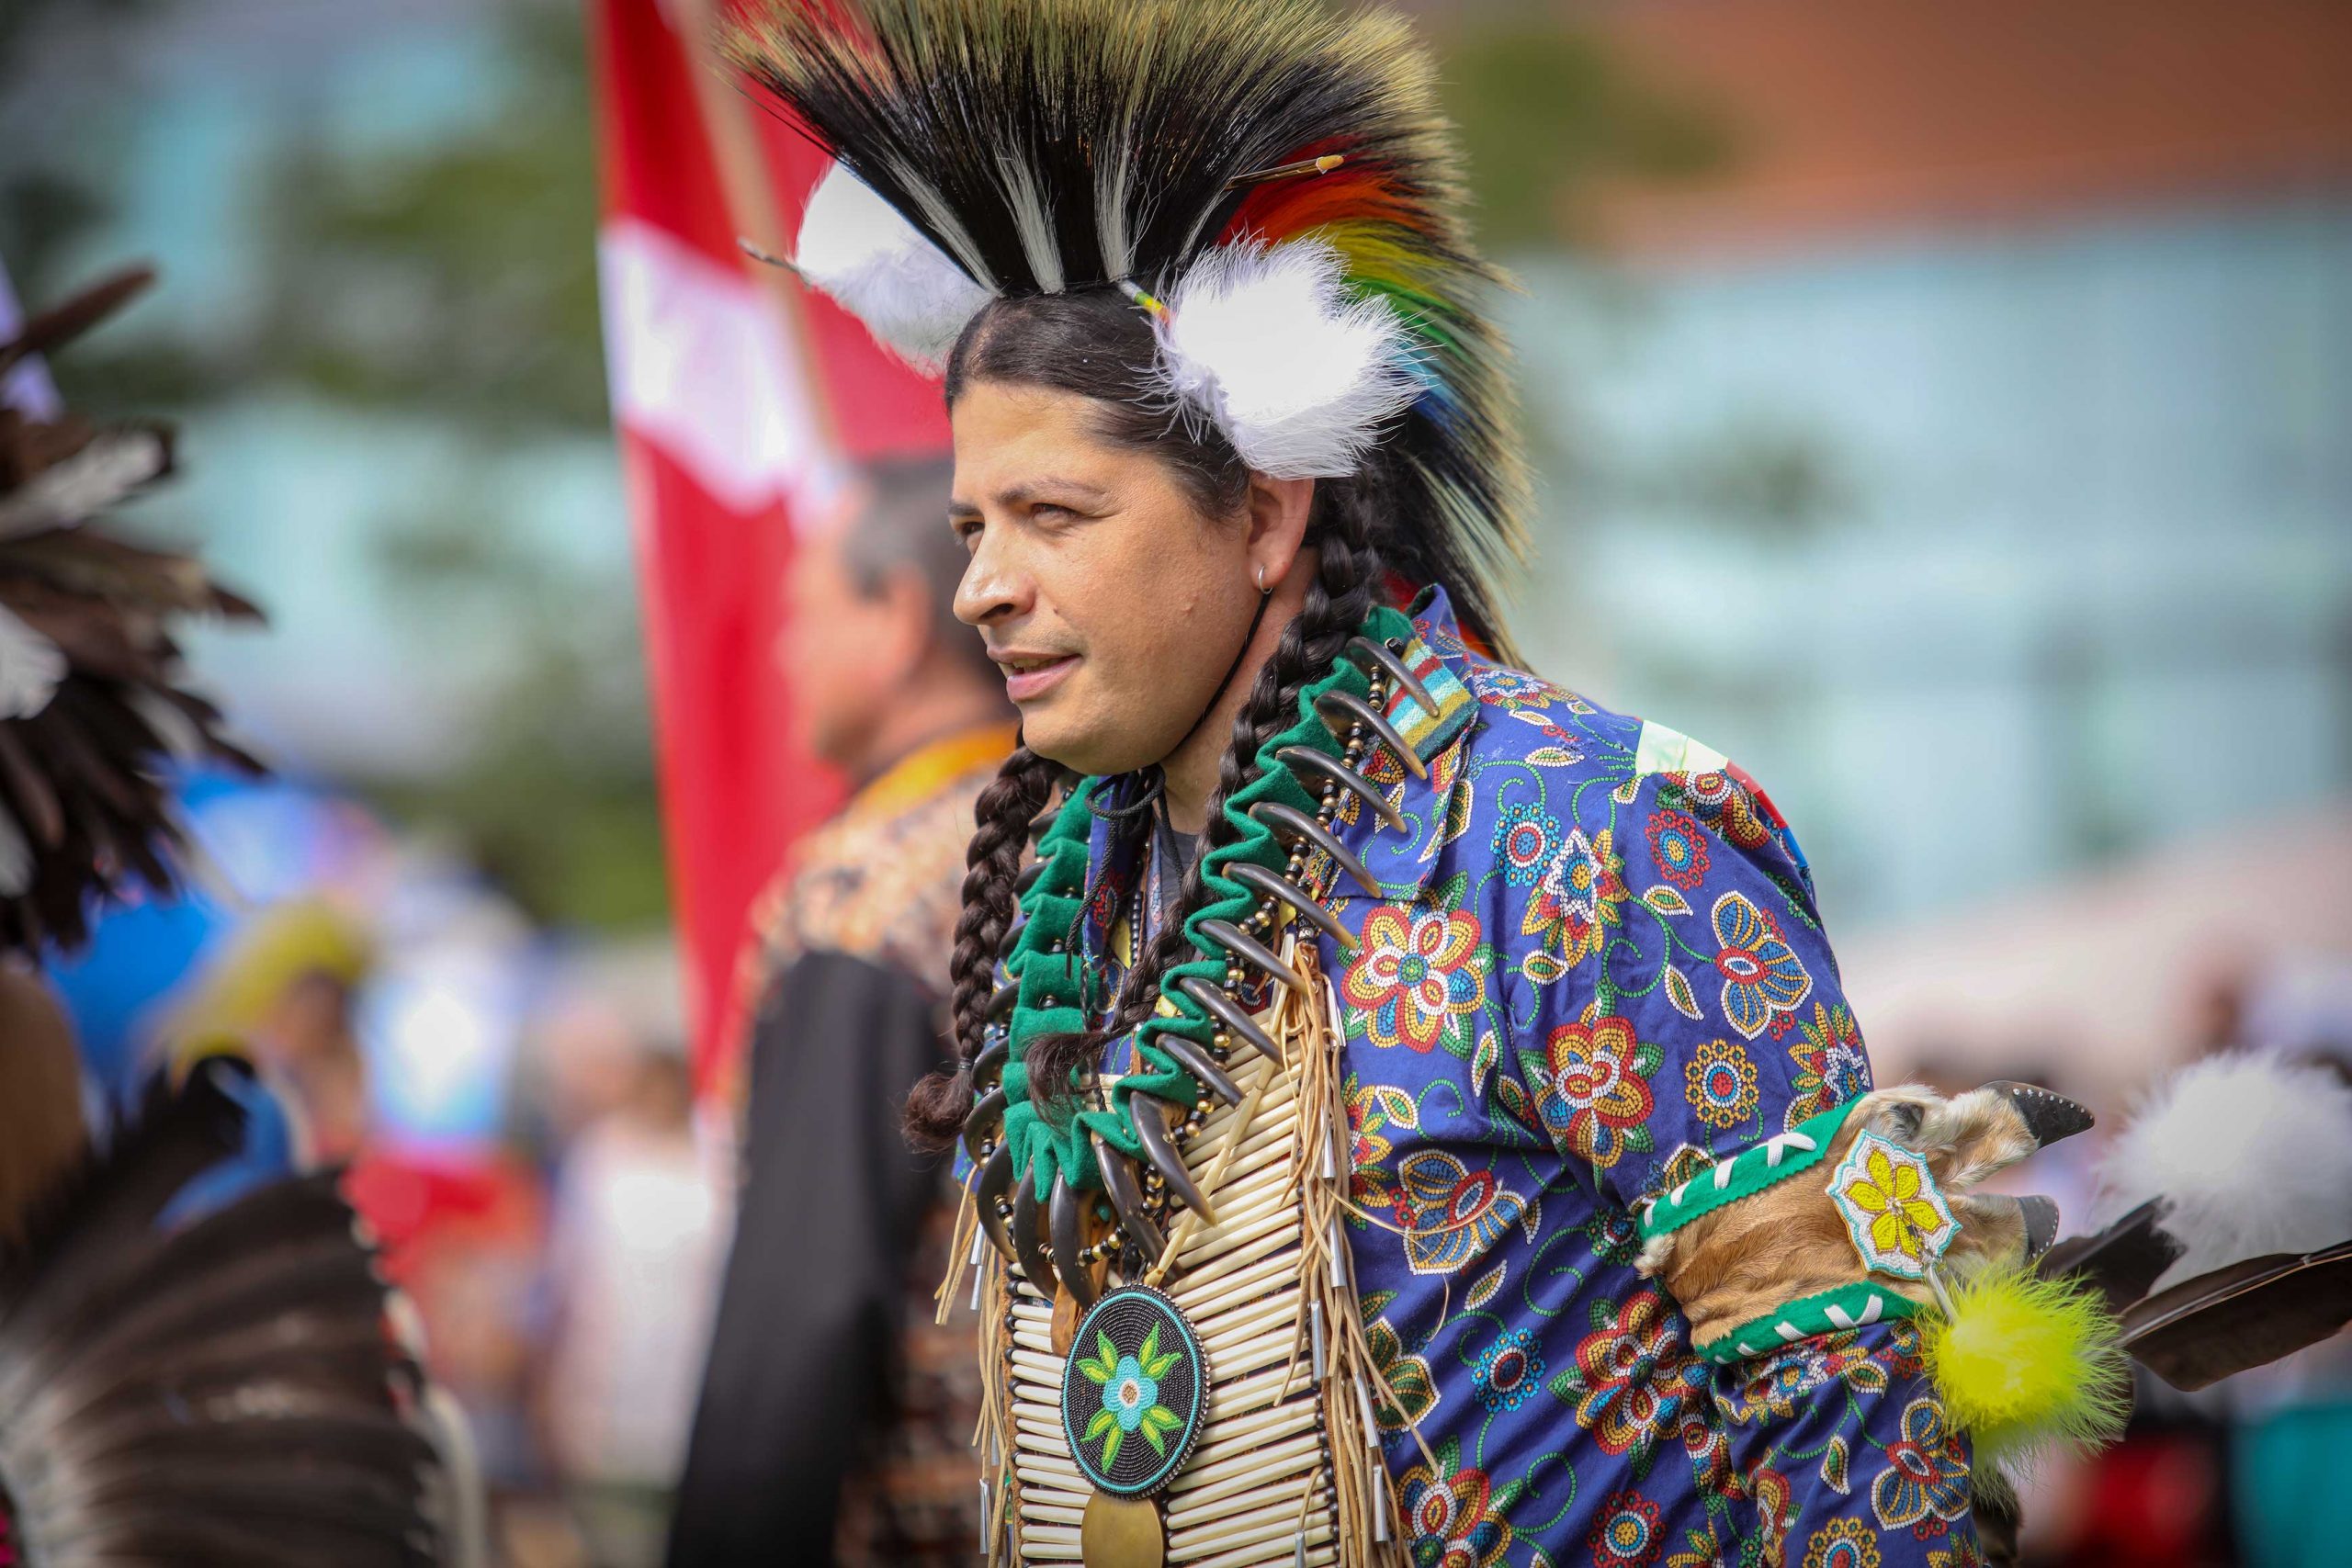 indigenous man dancing at mini pow wow on campus in 2019